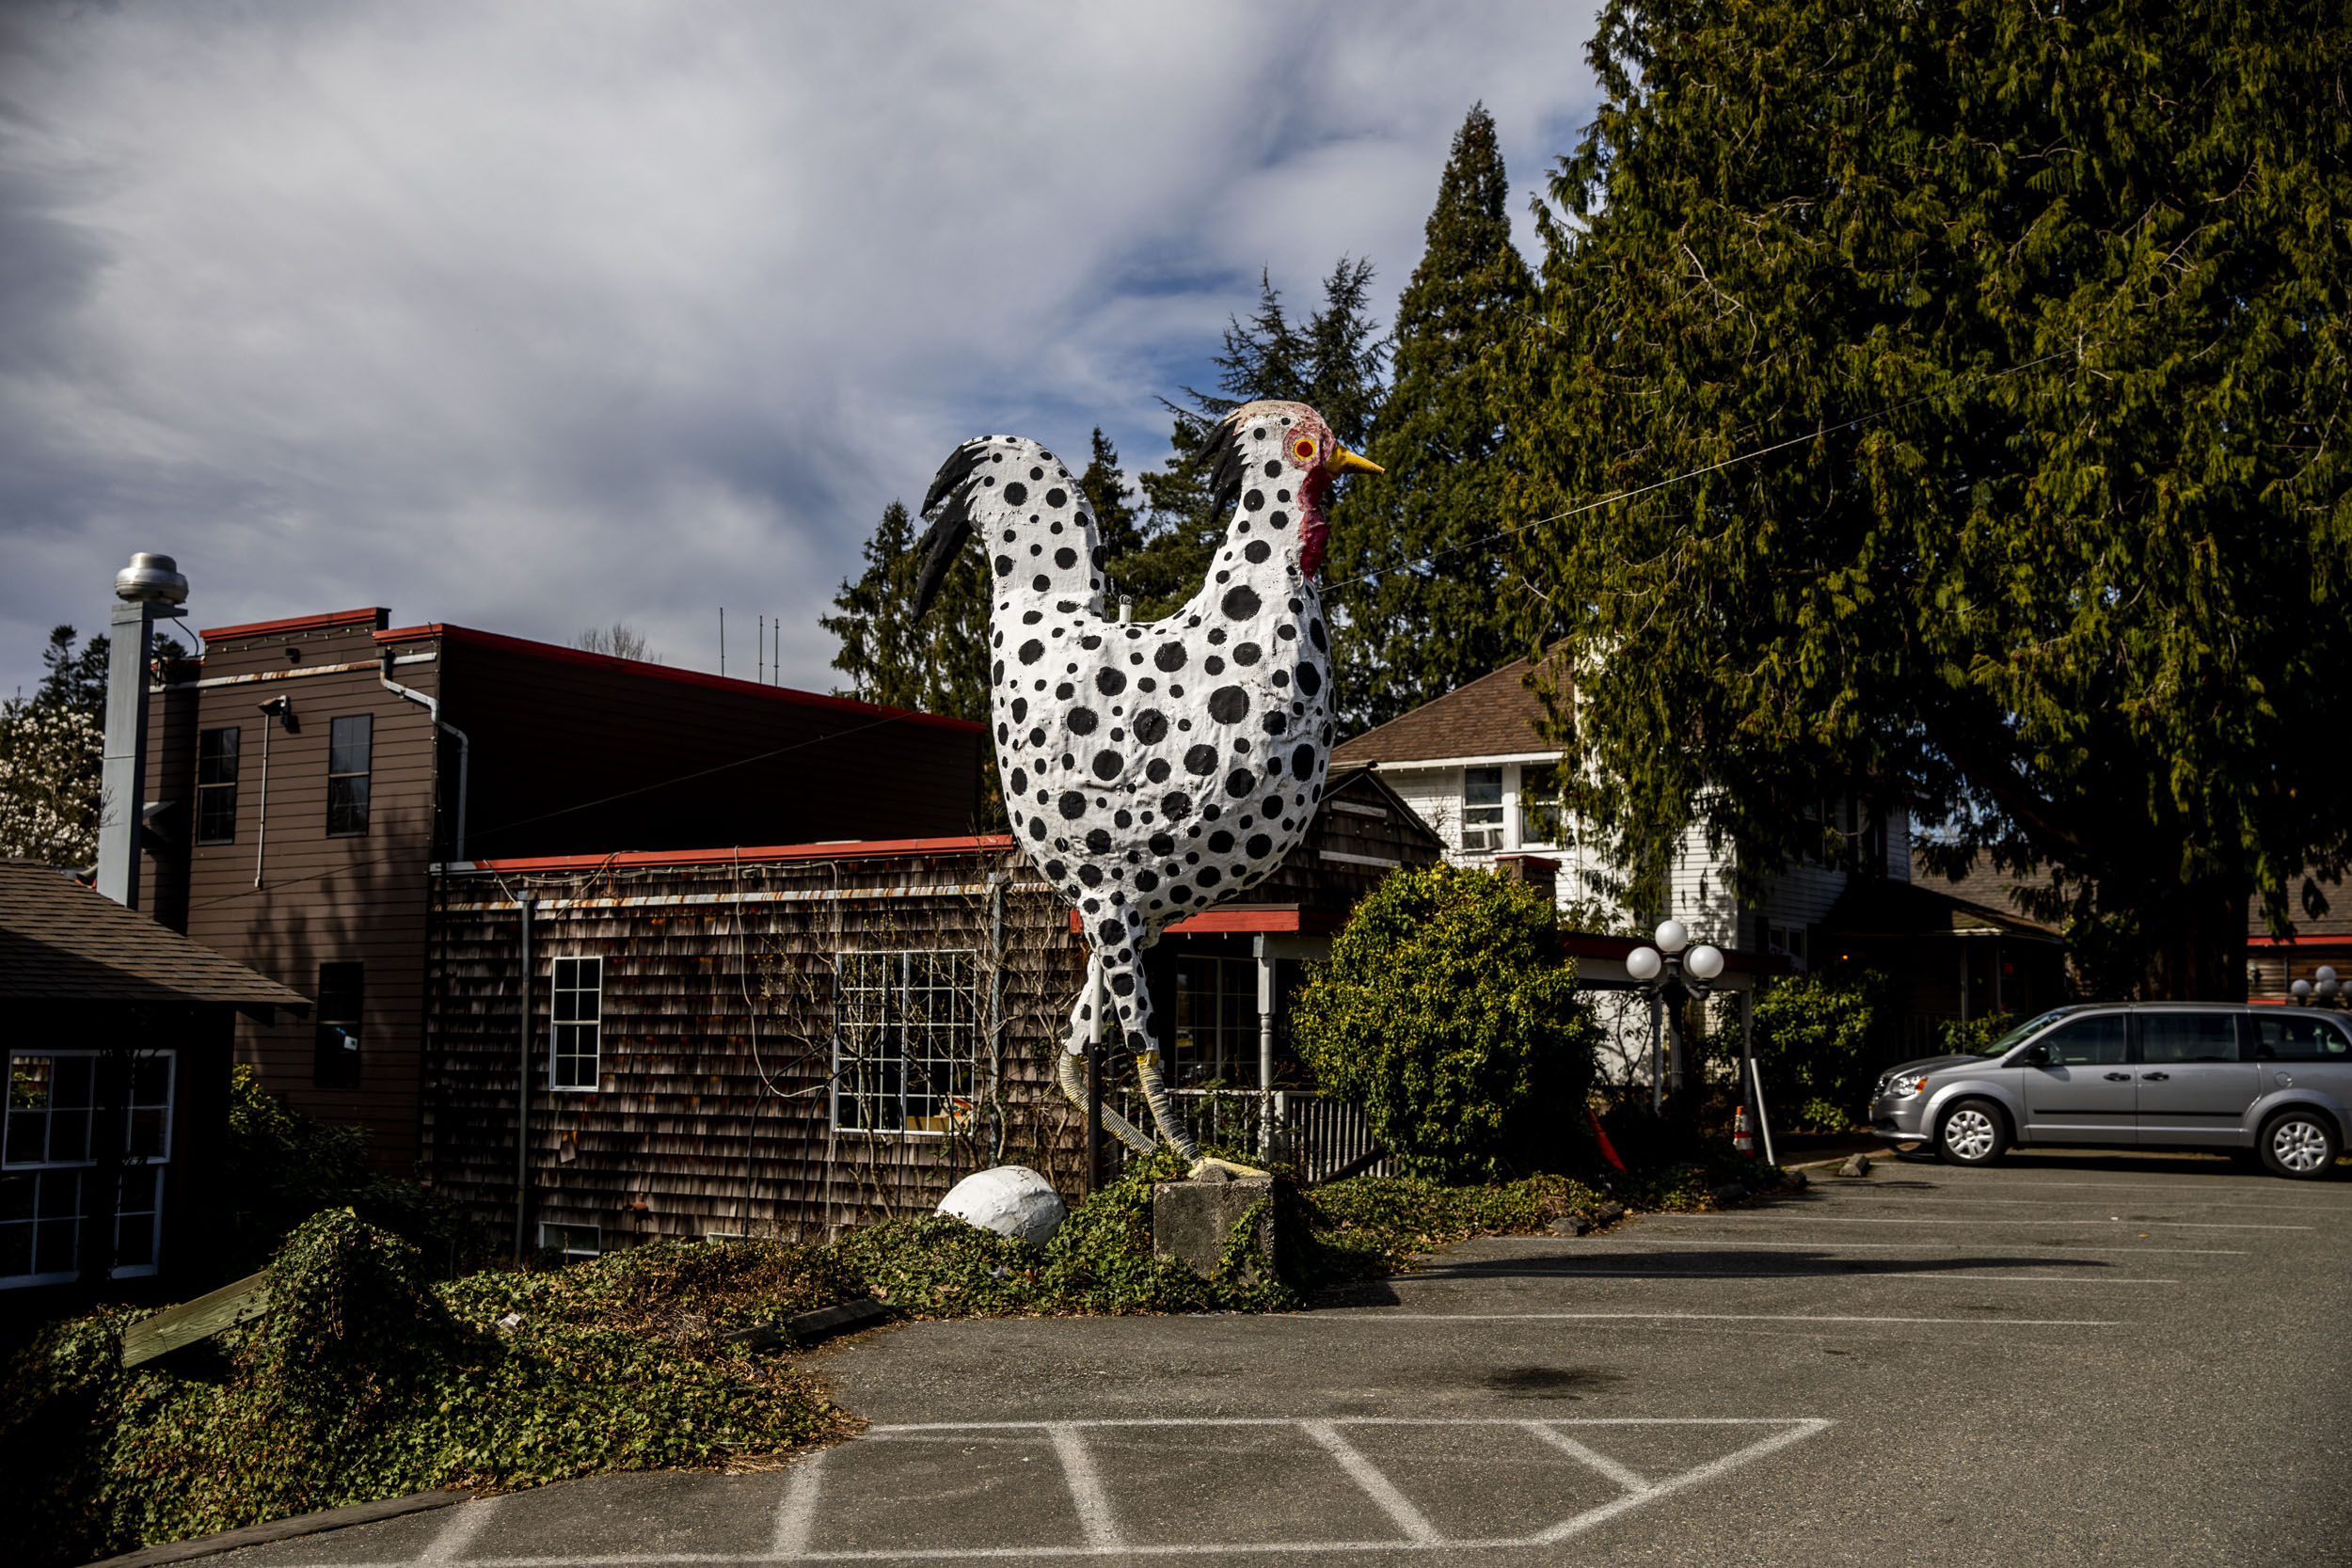 The Country Village Shops in Bothell on March 22, 2019.